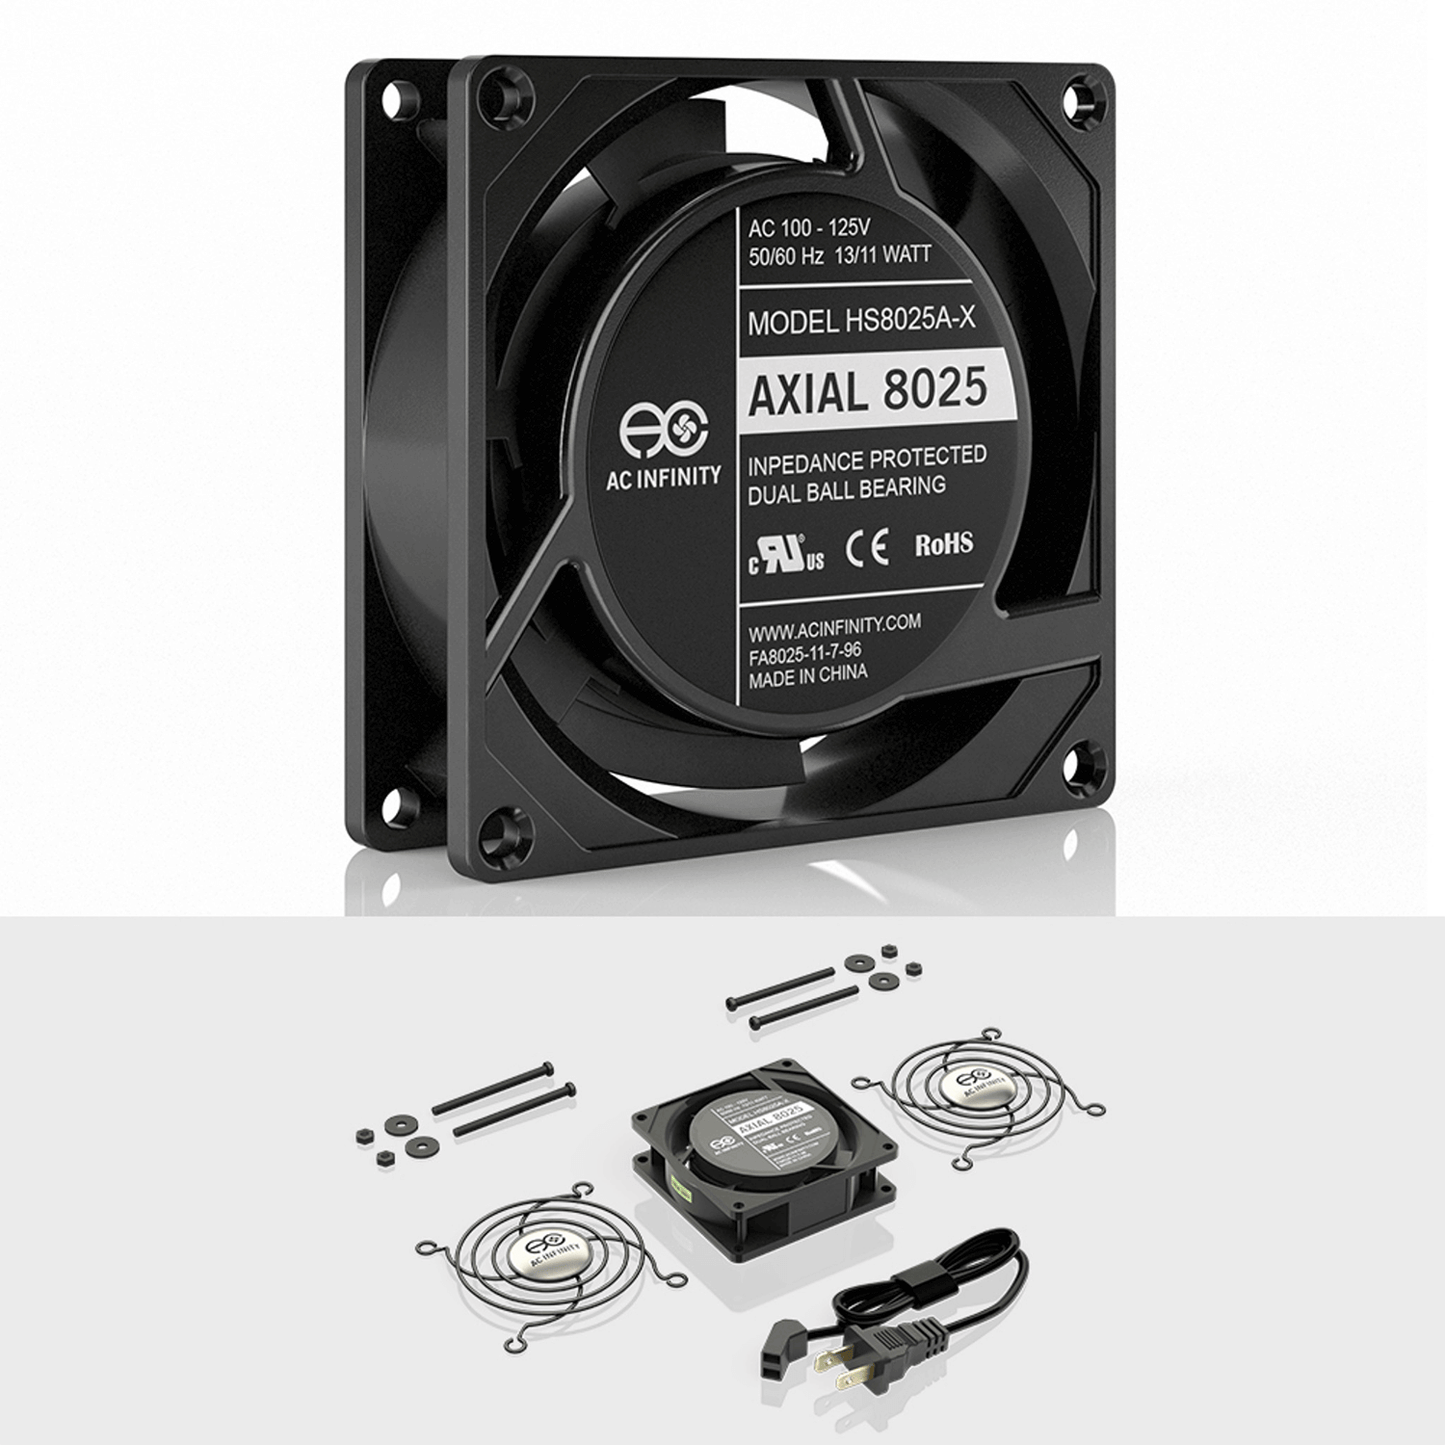 AC Infinity AXIAL 8025, Muffin 120V AC Cooling Fan, 80mm x 80mm x 25mm HS8025A-X Climate Control 854759004259